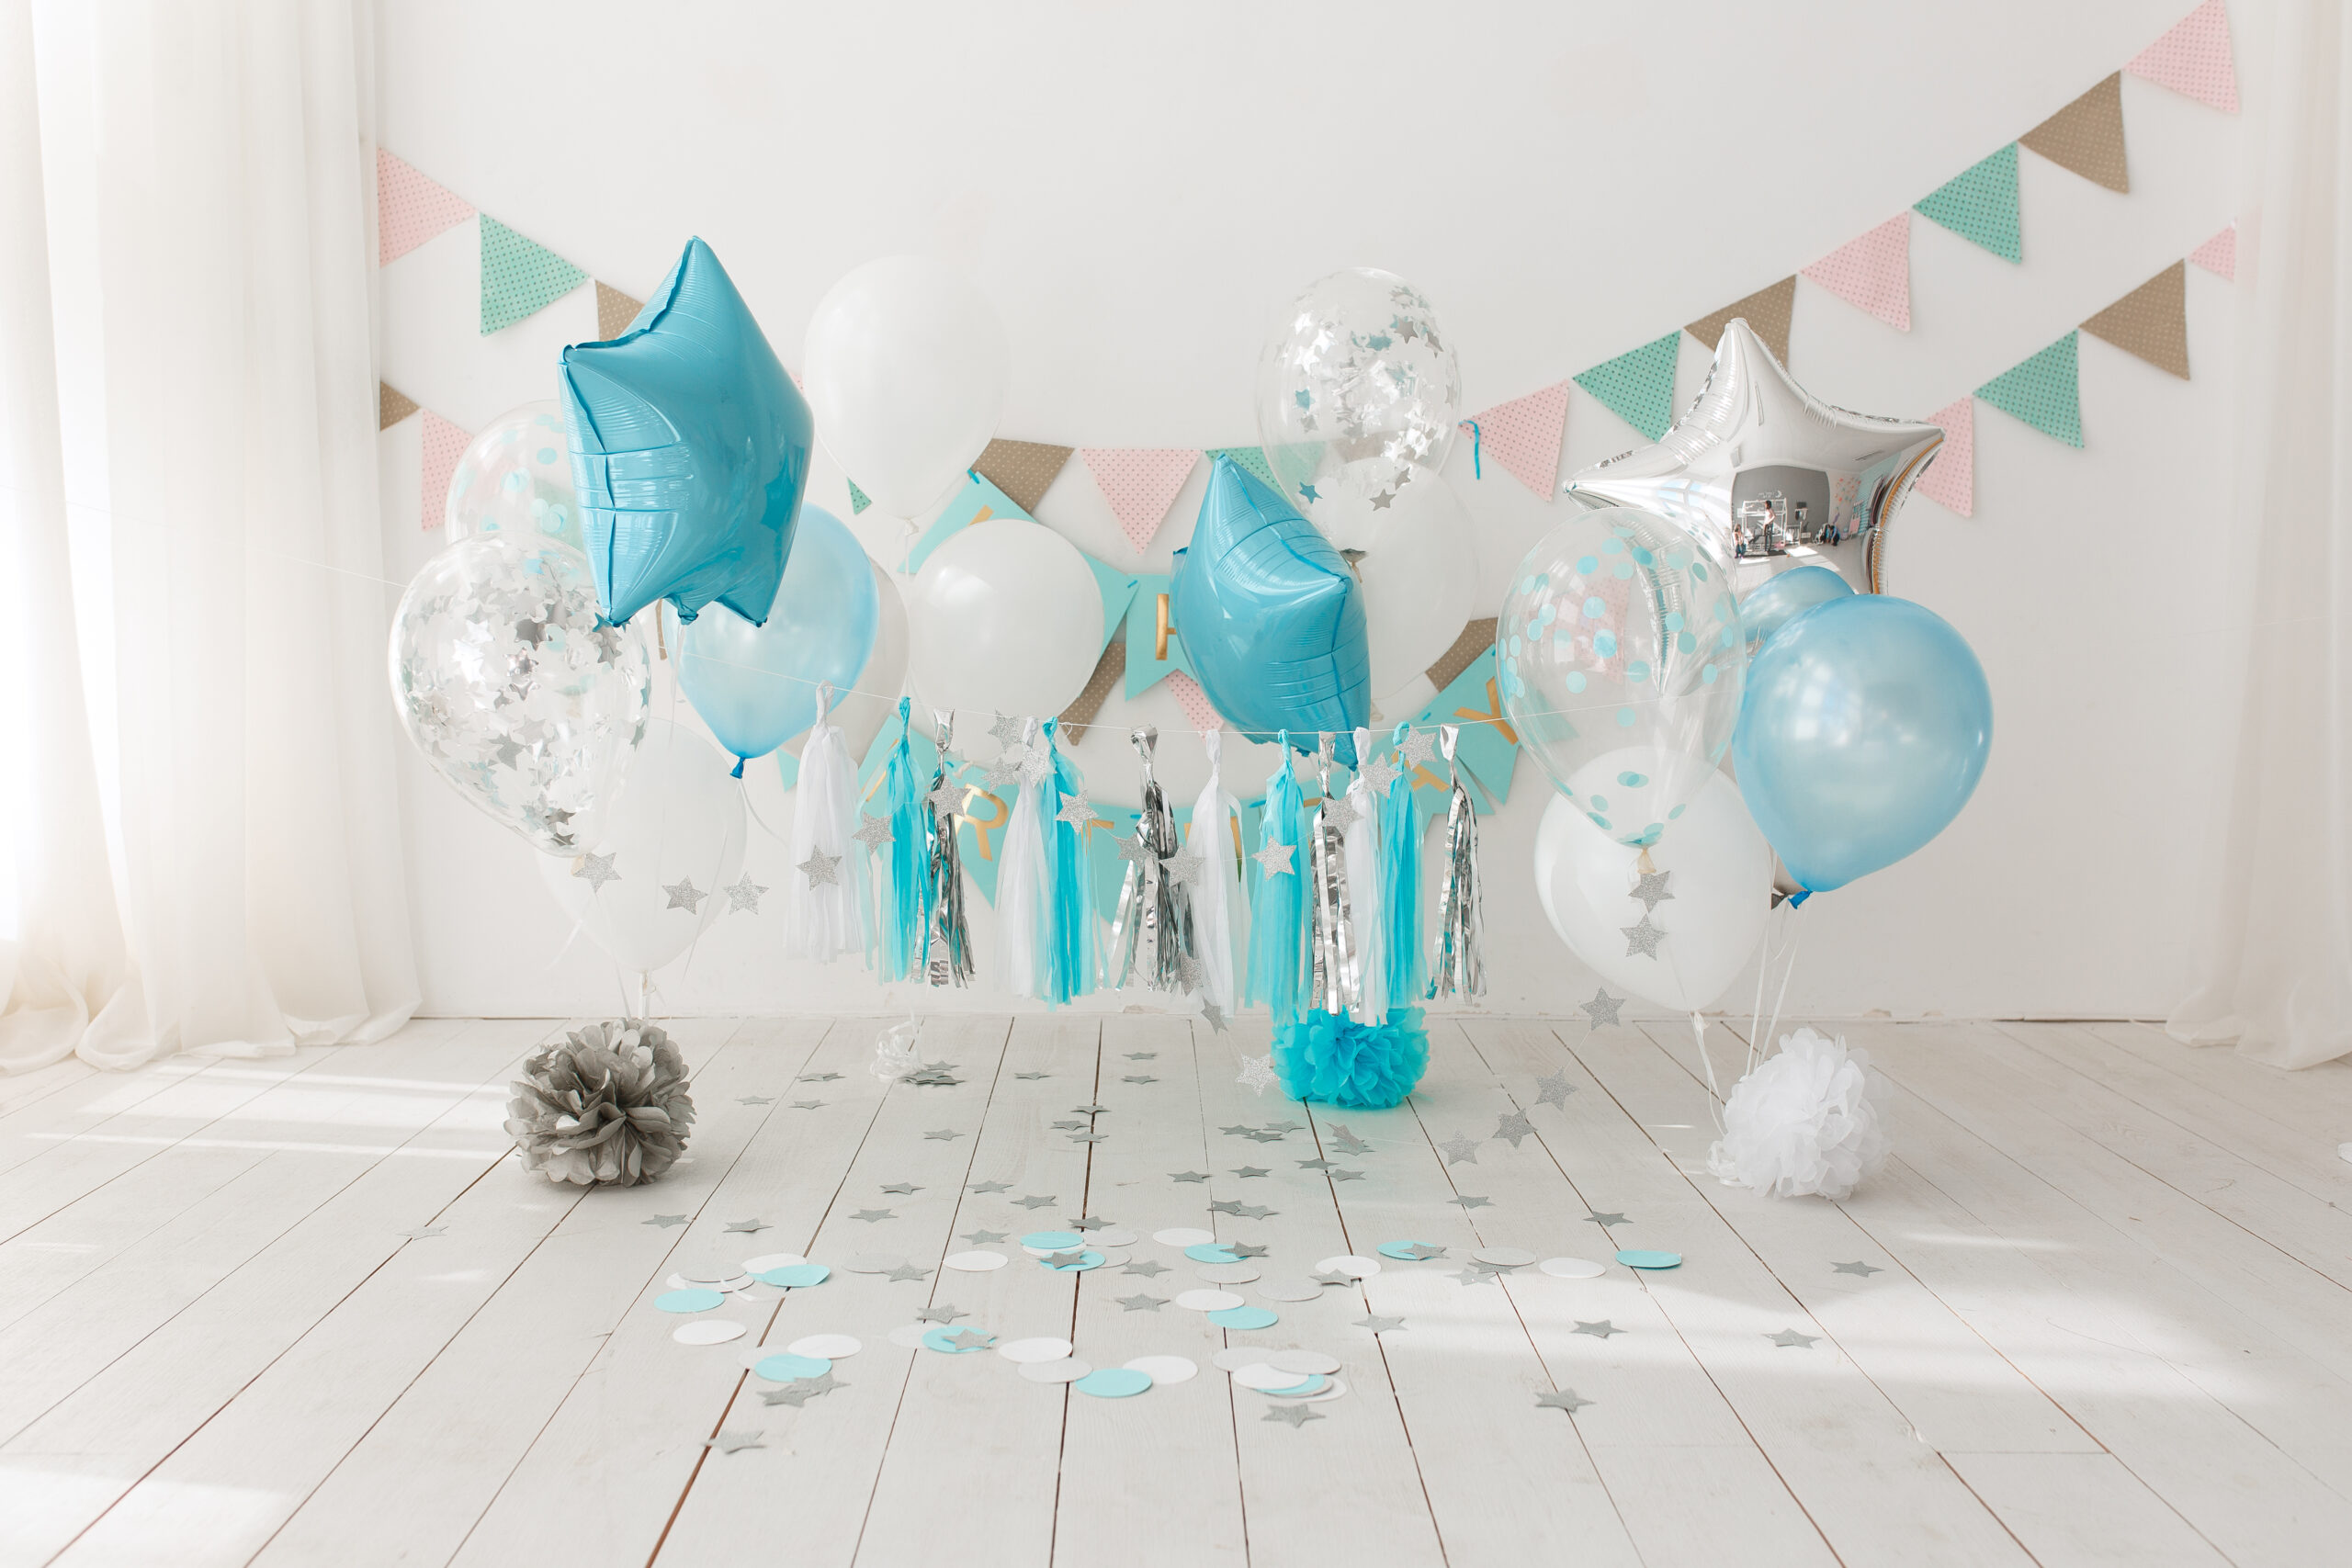 Festive background decoration for birthday celebration with gourmet cake and blue balloons in studio, cake smash first year concept.